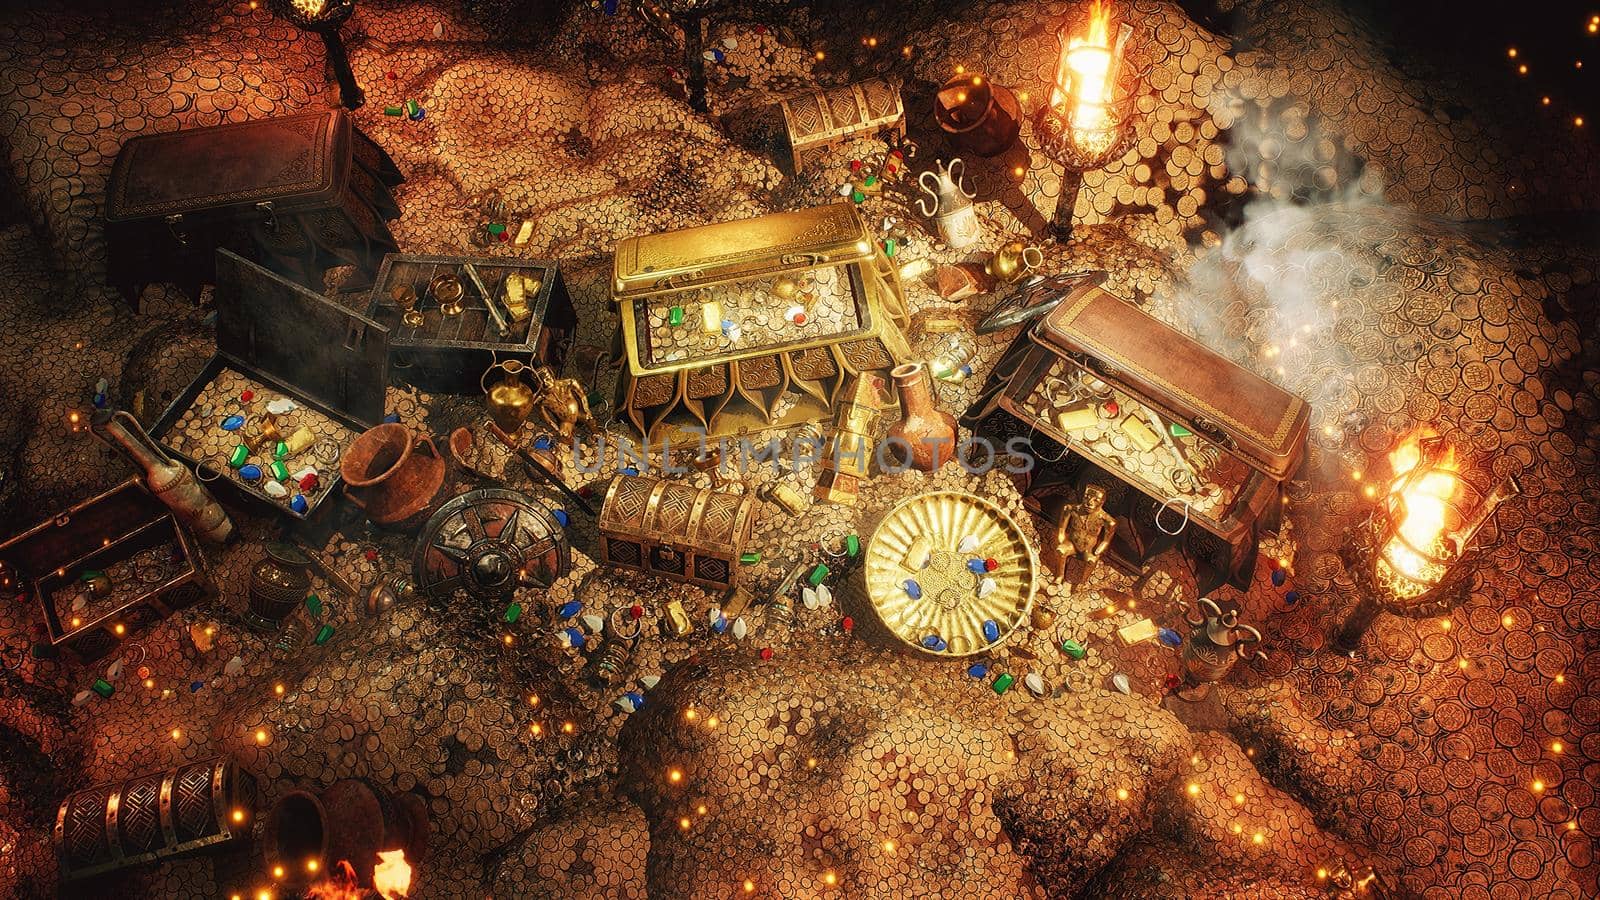 Pirate treasures in a dark cave. Old coins, diamonds, and gold treasures. A lot of jewelry made of gold statuettes, precious stones, bracelets and chests. 3D Rendering. by designprojects